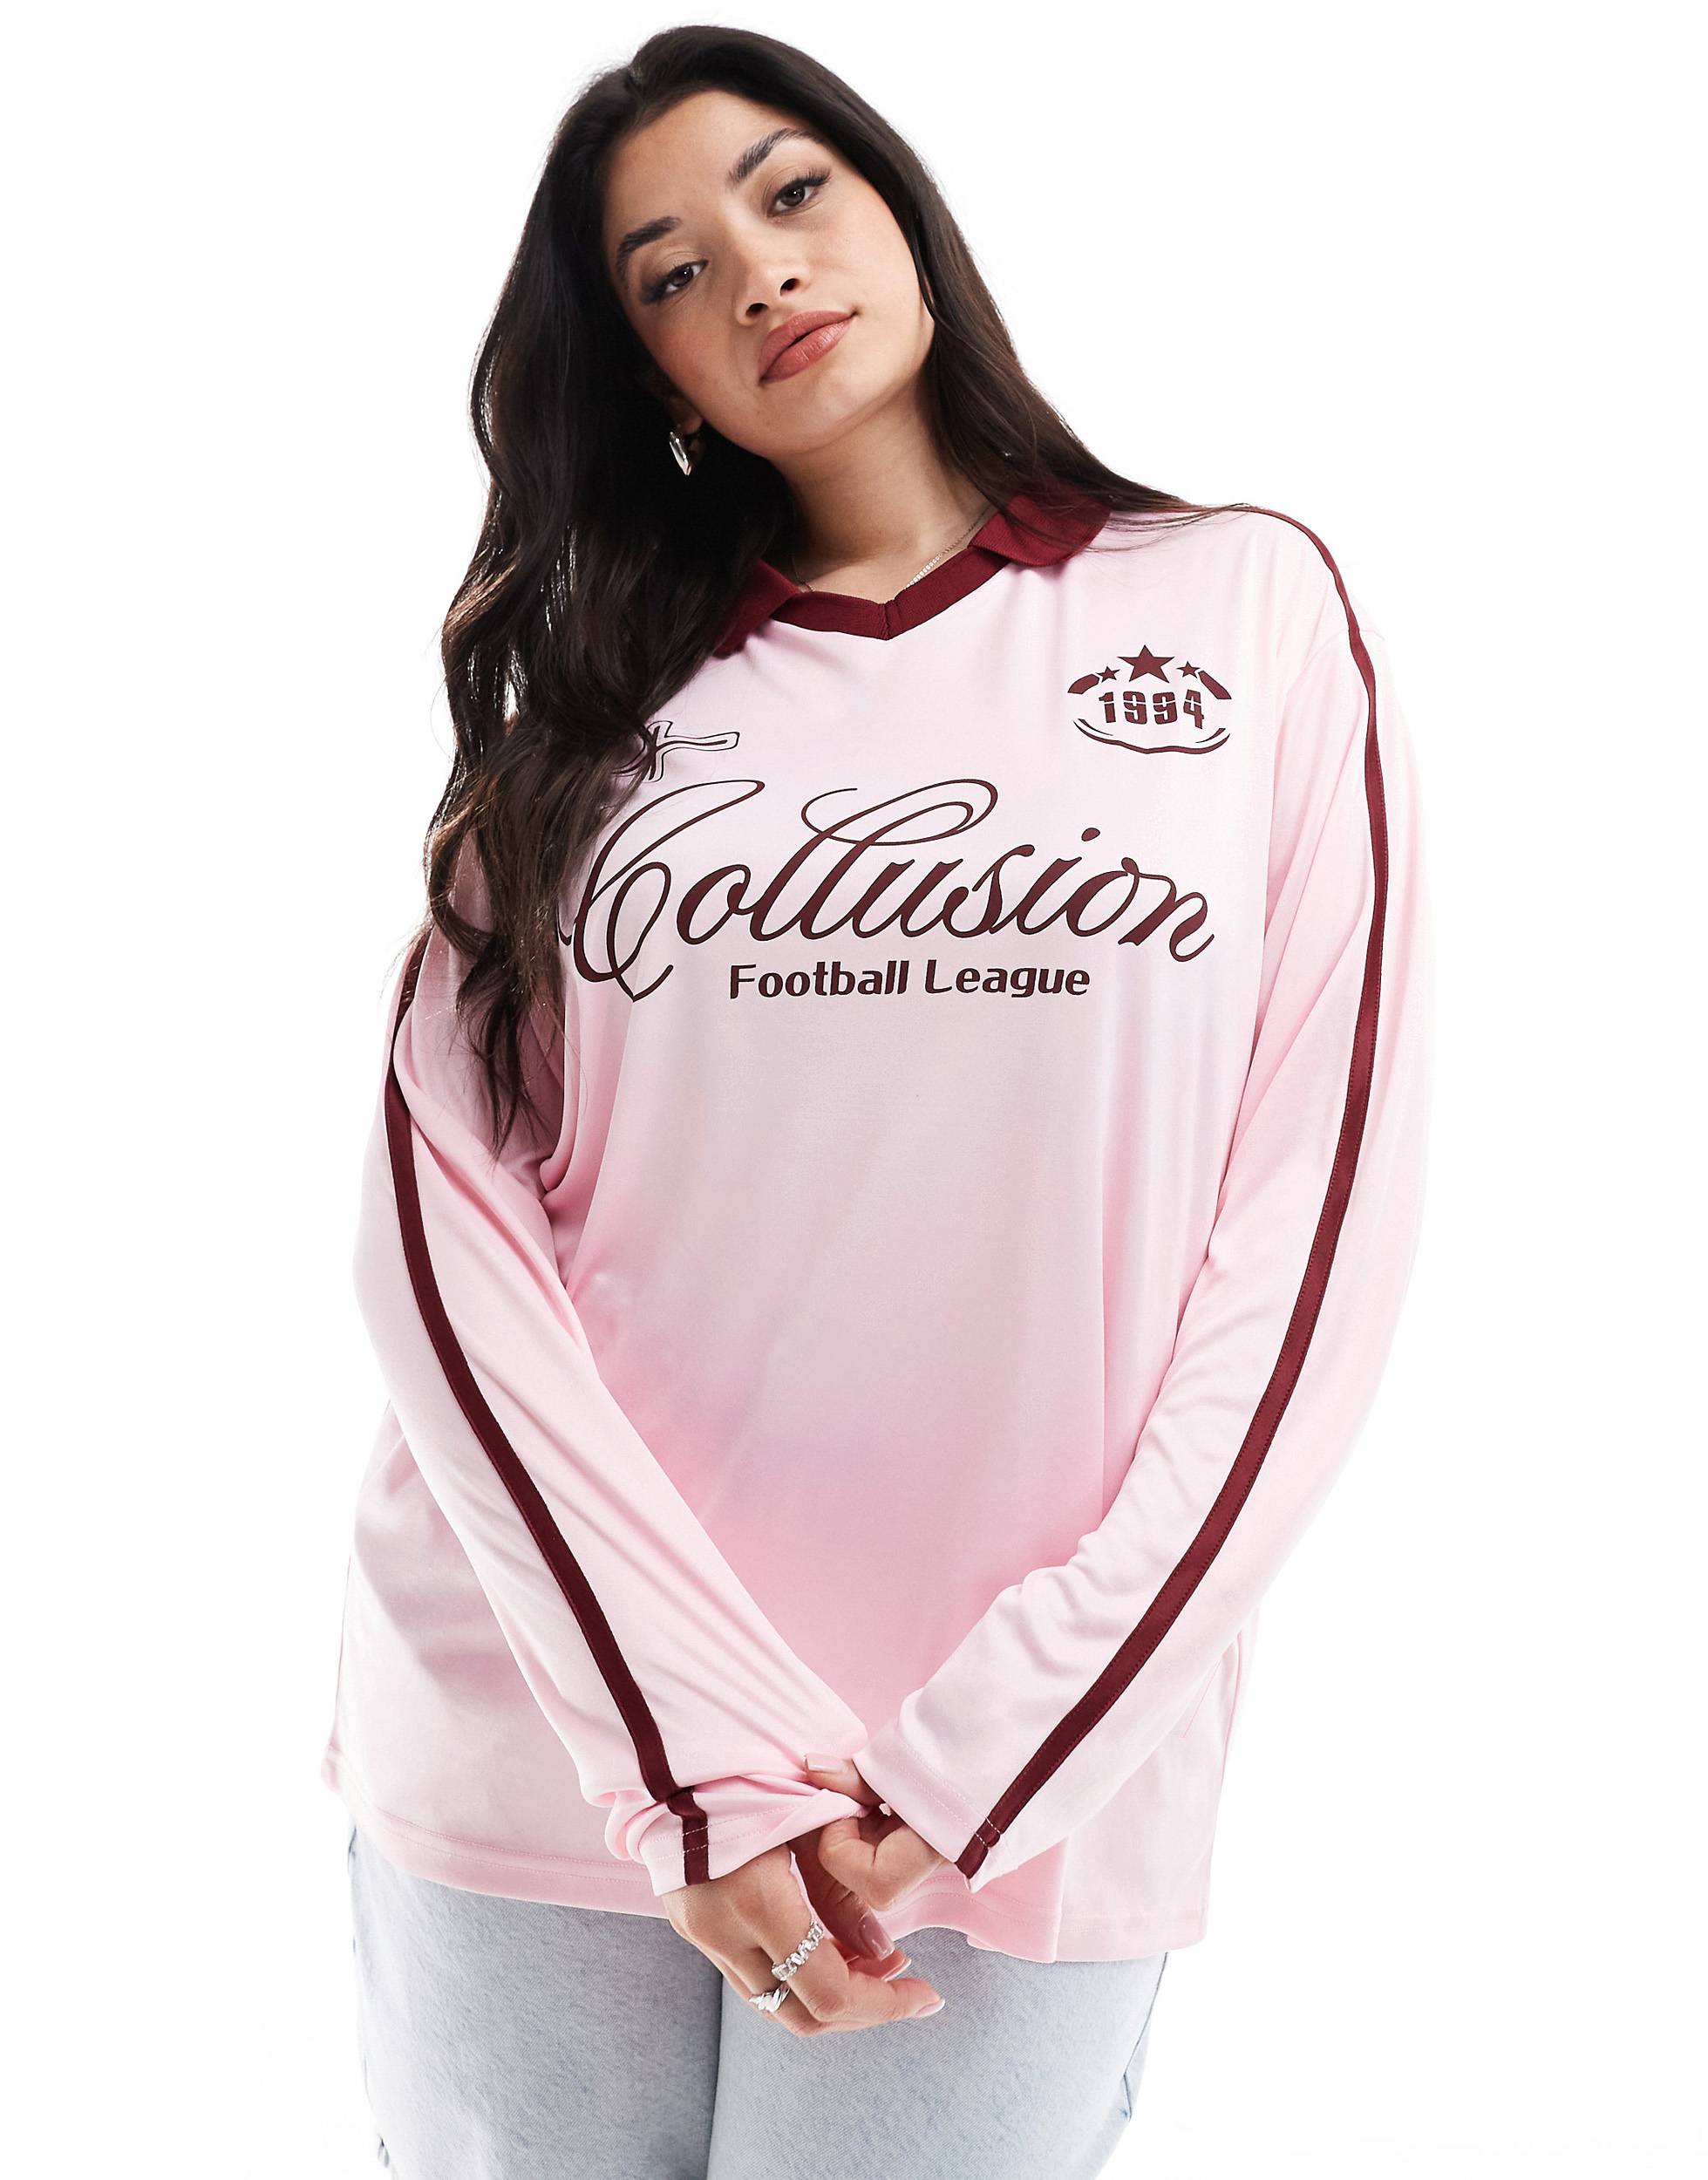 Collusion Plus Oversized Long Sleeve Football Shirt in Pink